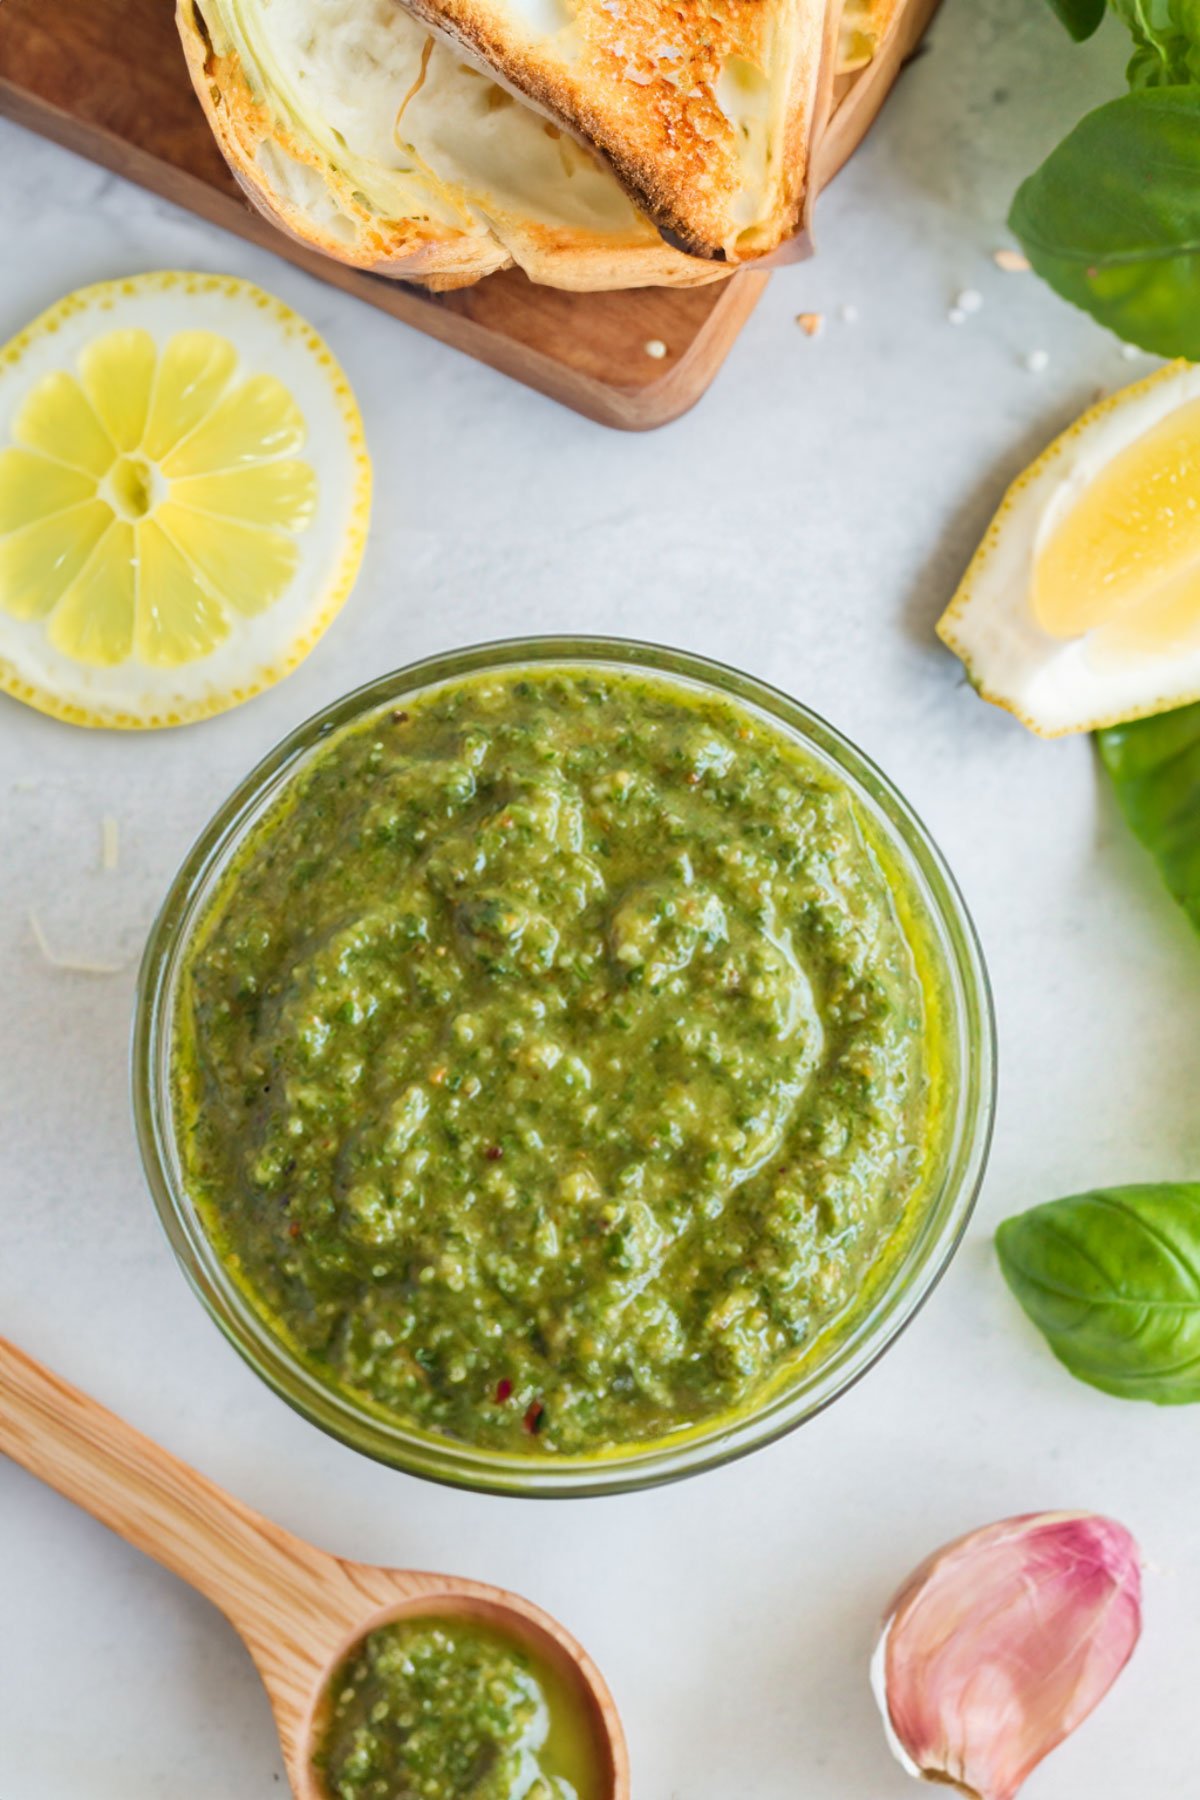 Lemon pesto in glass bowl with crusty bread, lemon slices, basil leaves, and wooden spoon.